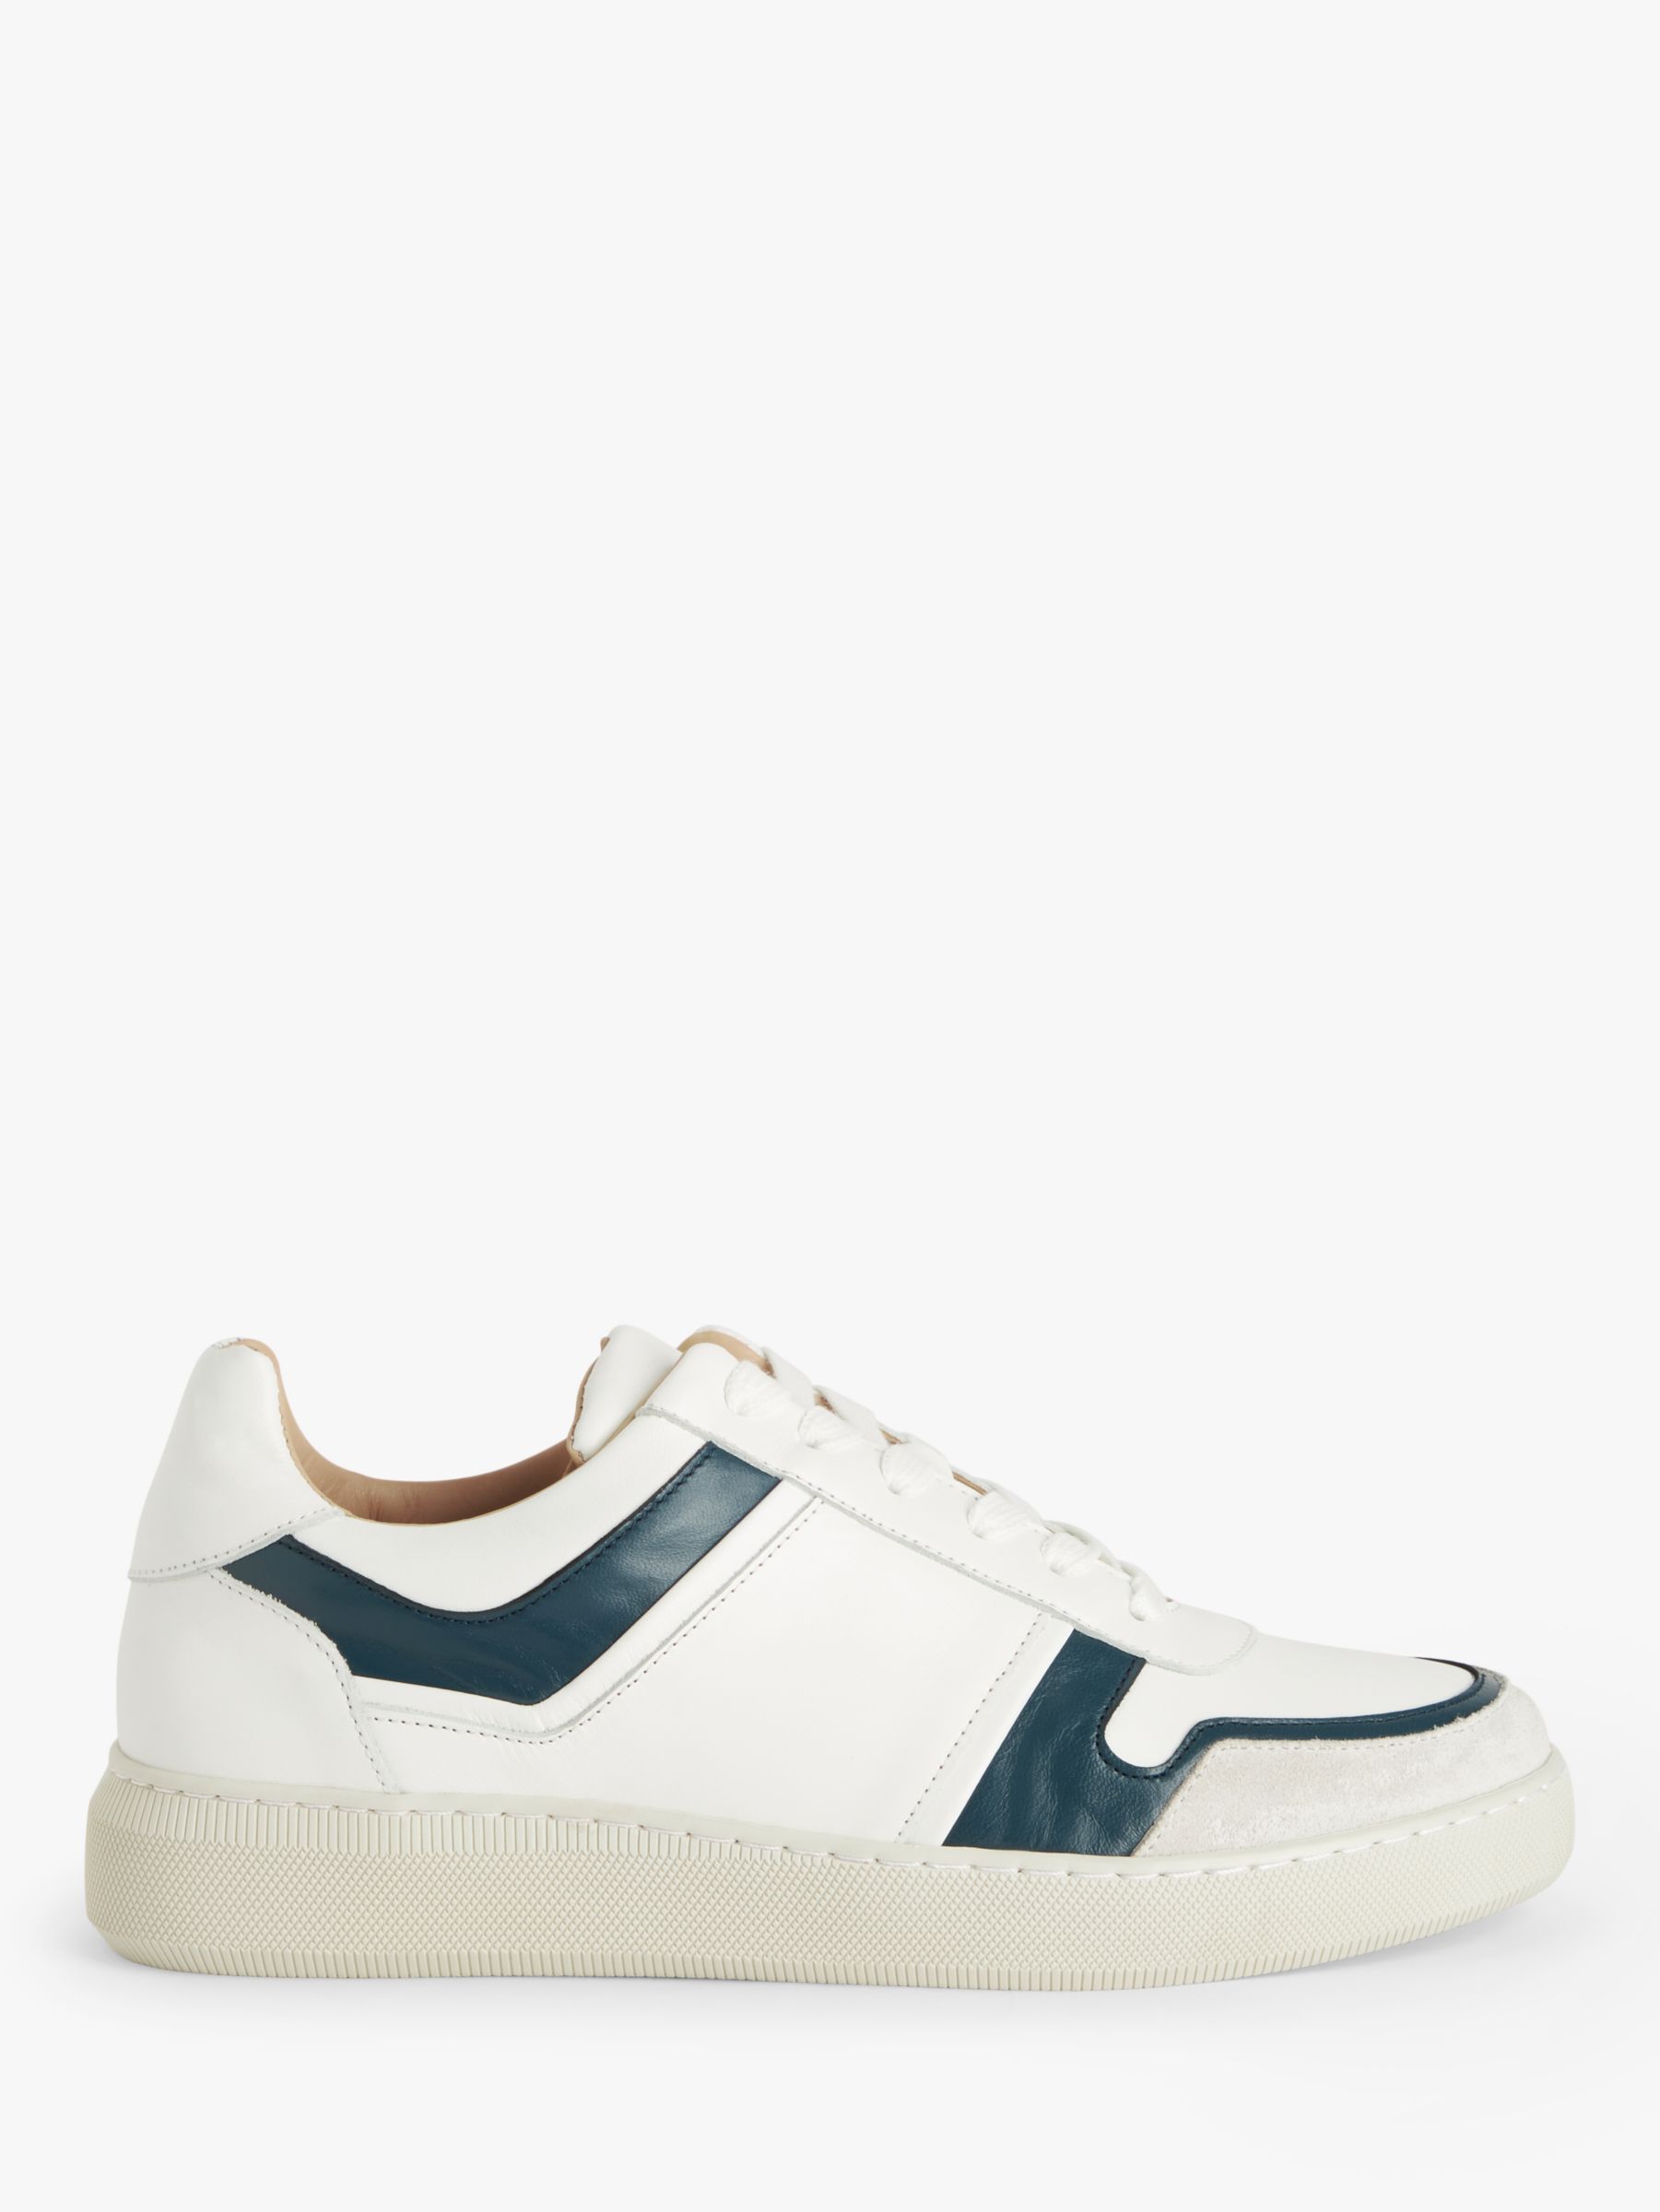 John Lewis Flynne Leather Lace Up Cupsole Trainers, White/Teal at John ...